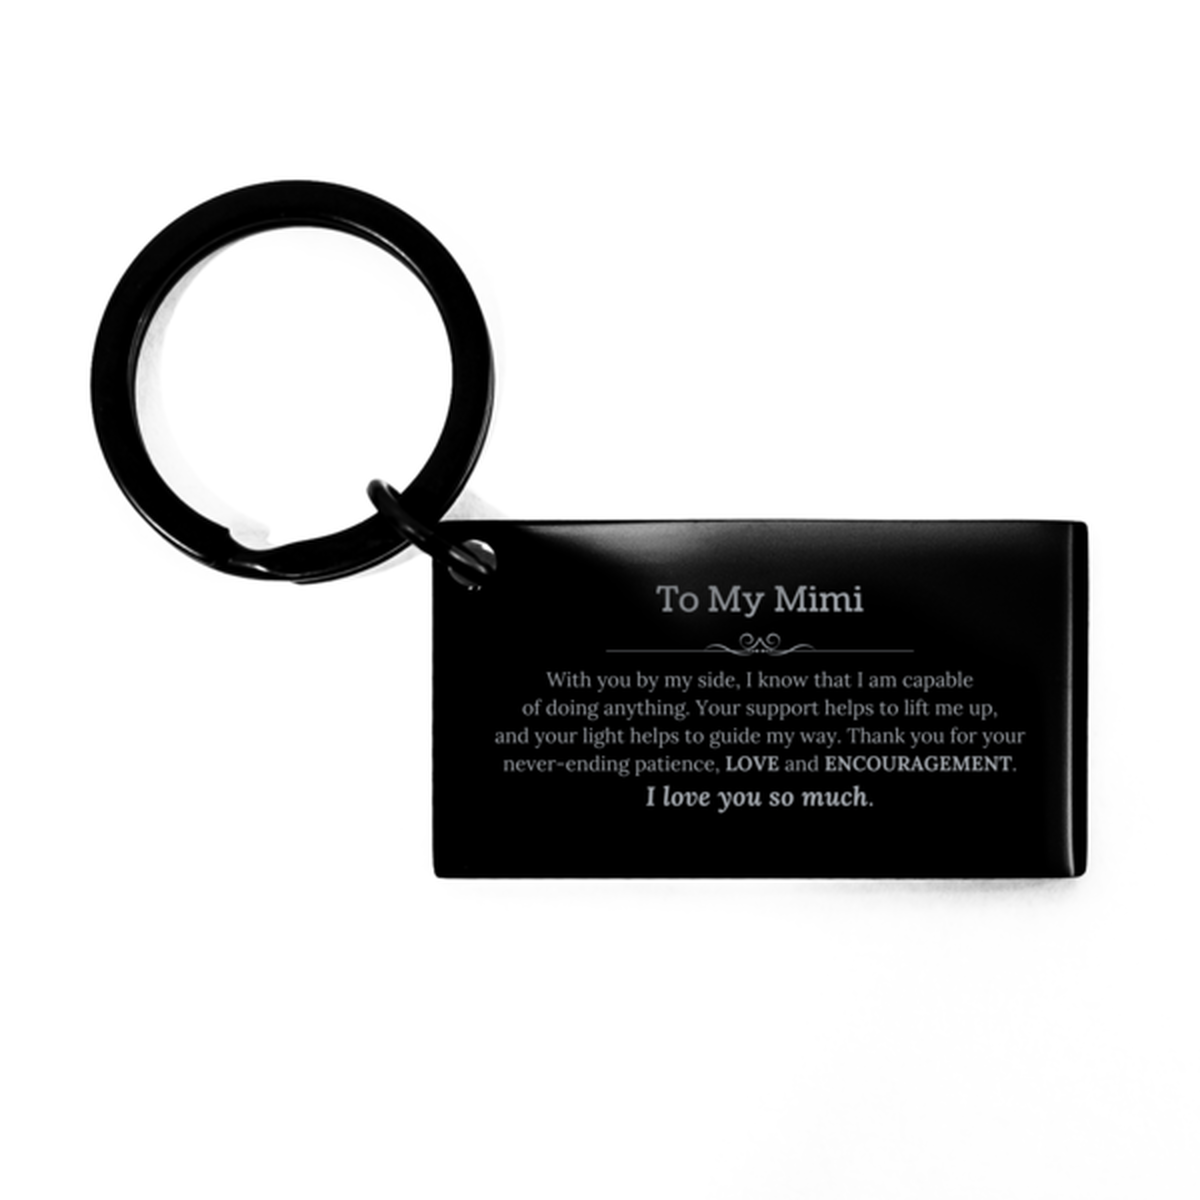 Appreciation Mimi Keychain Gifts, To My Mimi Birthday Christmas Wedding Keepsake Gifts for Mimi With you by my side, I know that I am capable of doing anything. I love you so much